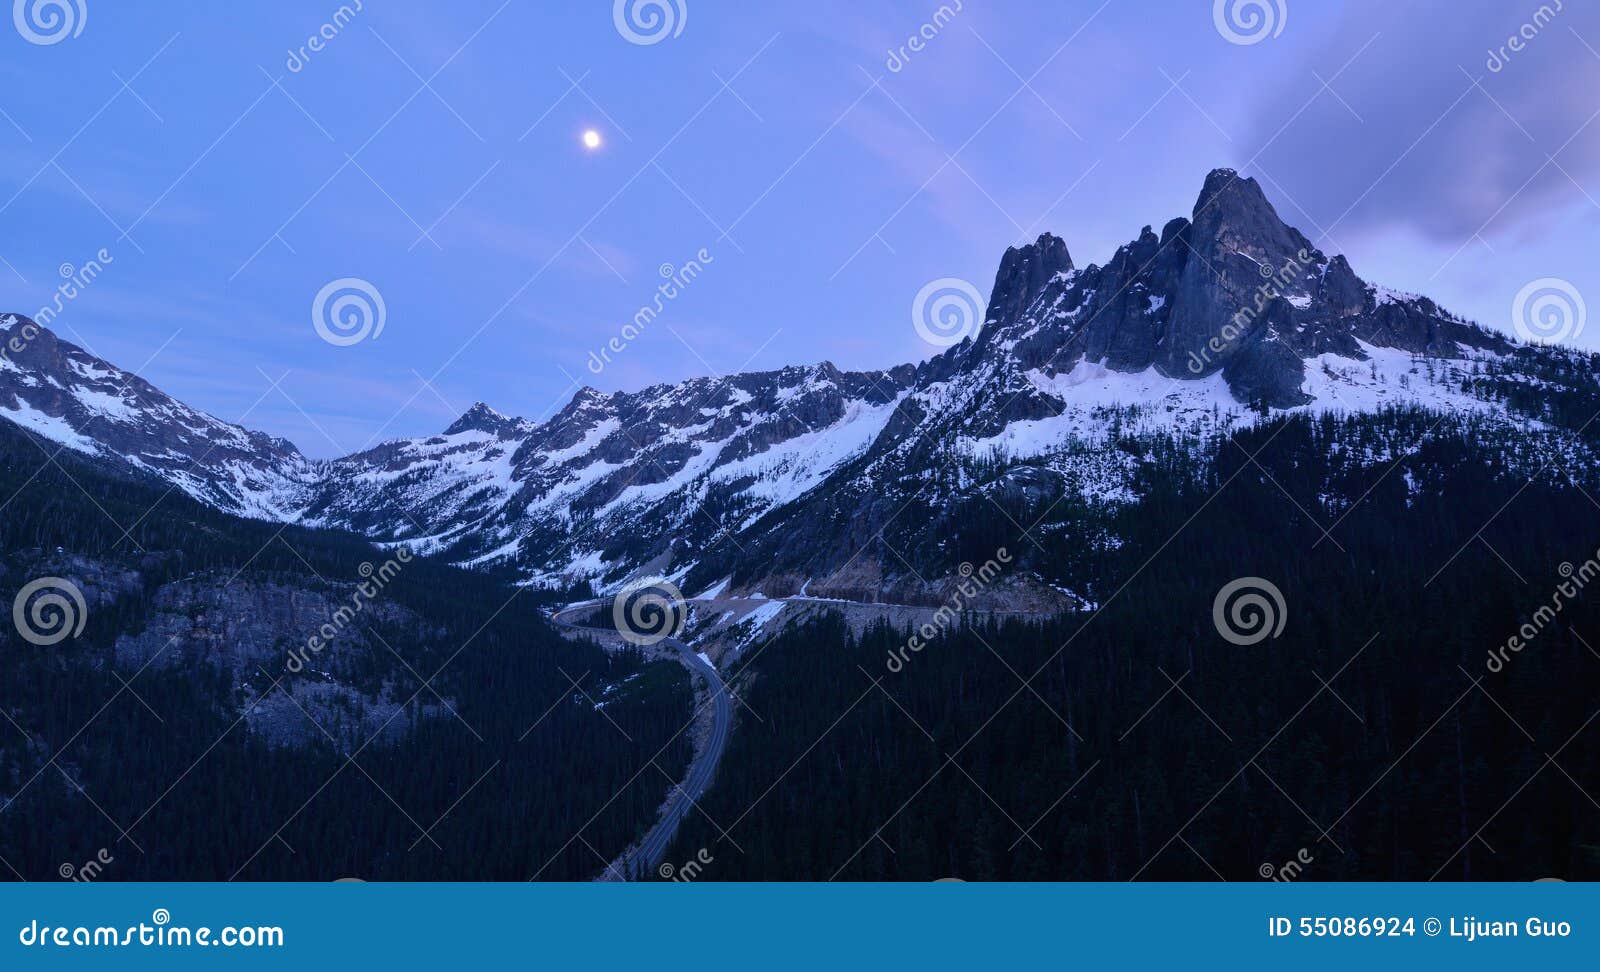 liberty bell and the early winter spires, north cascades